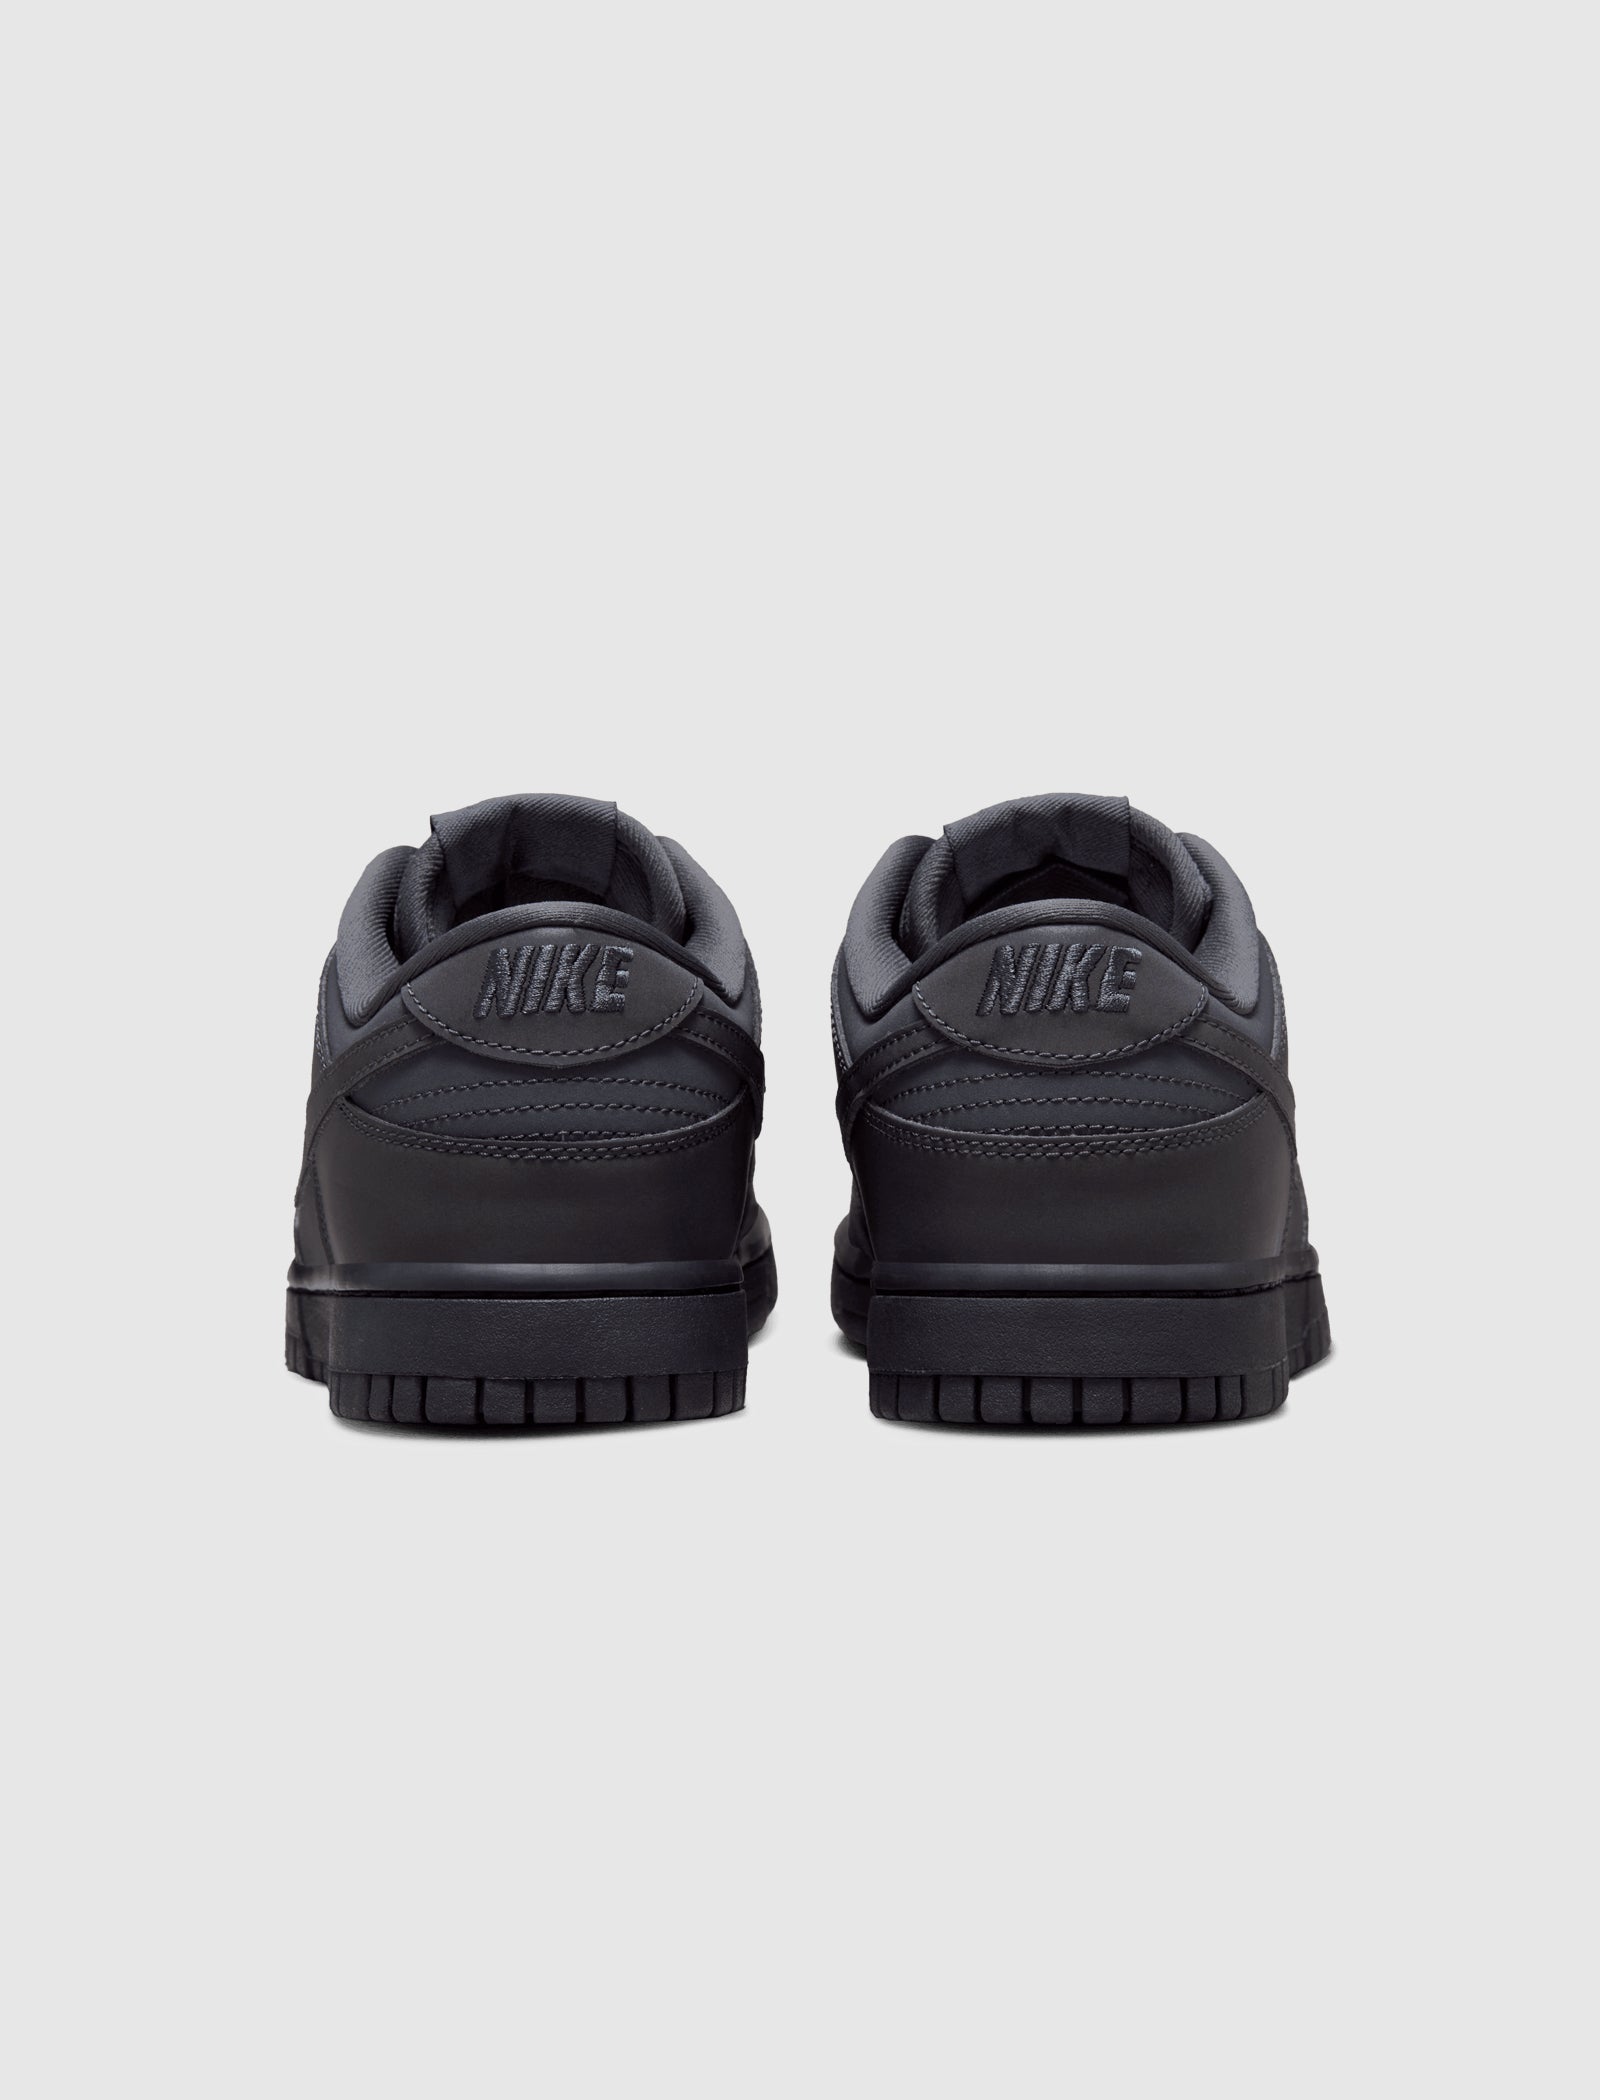 WOMEN'S DUNK LOW "ANTHRACITE"